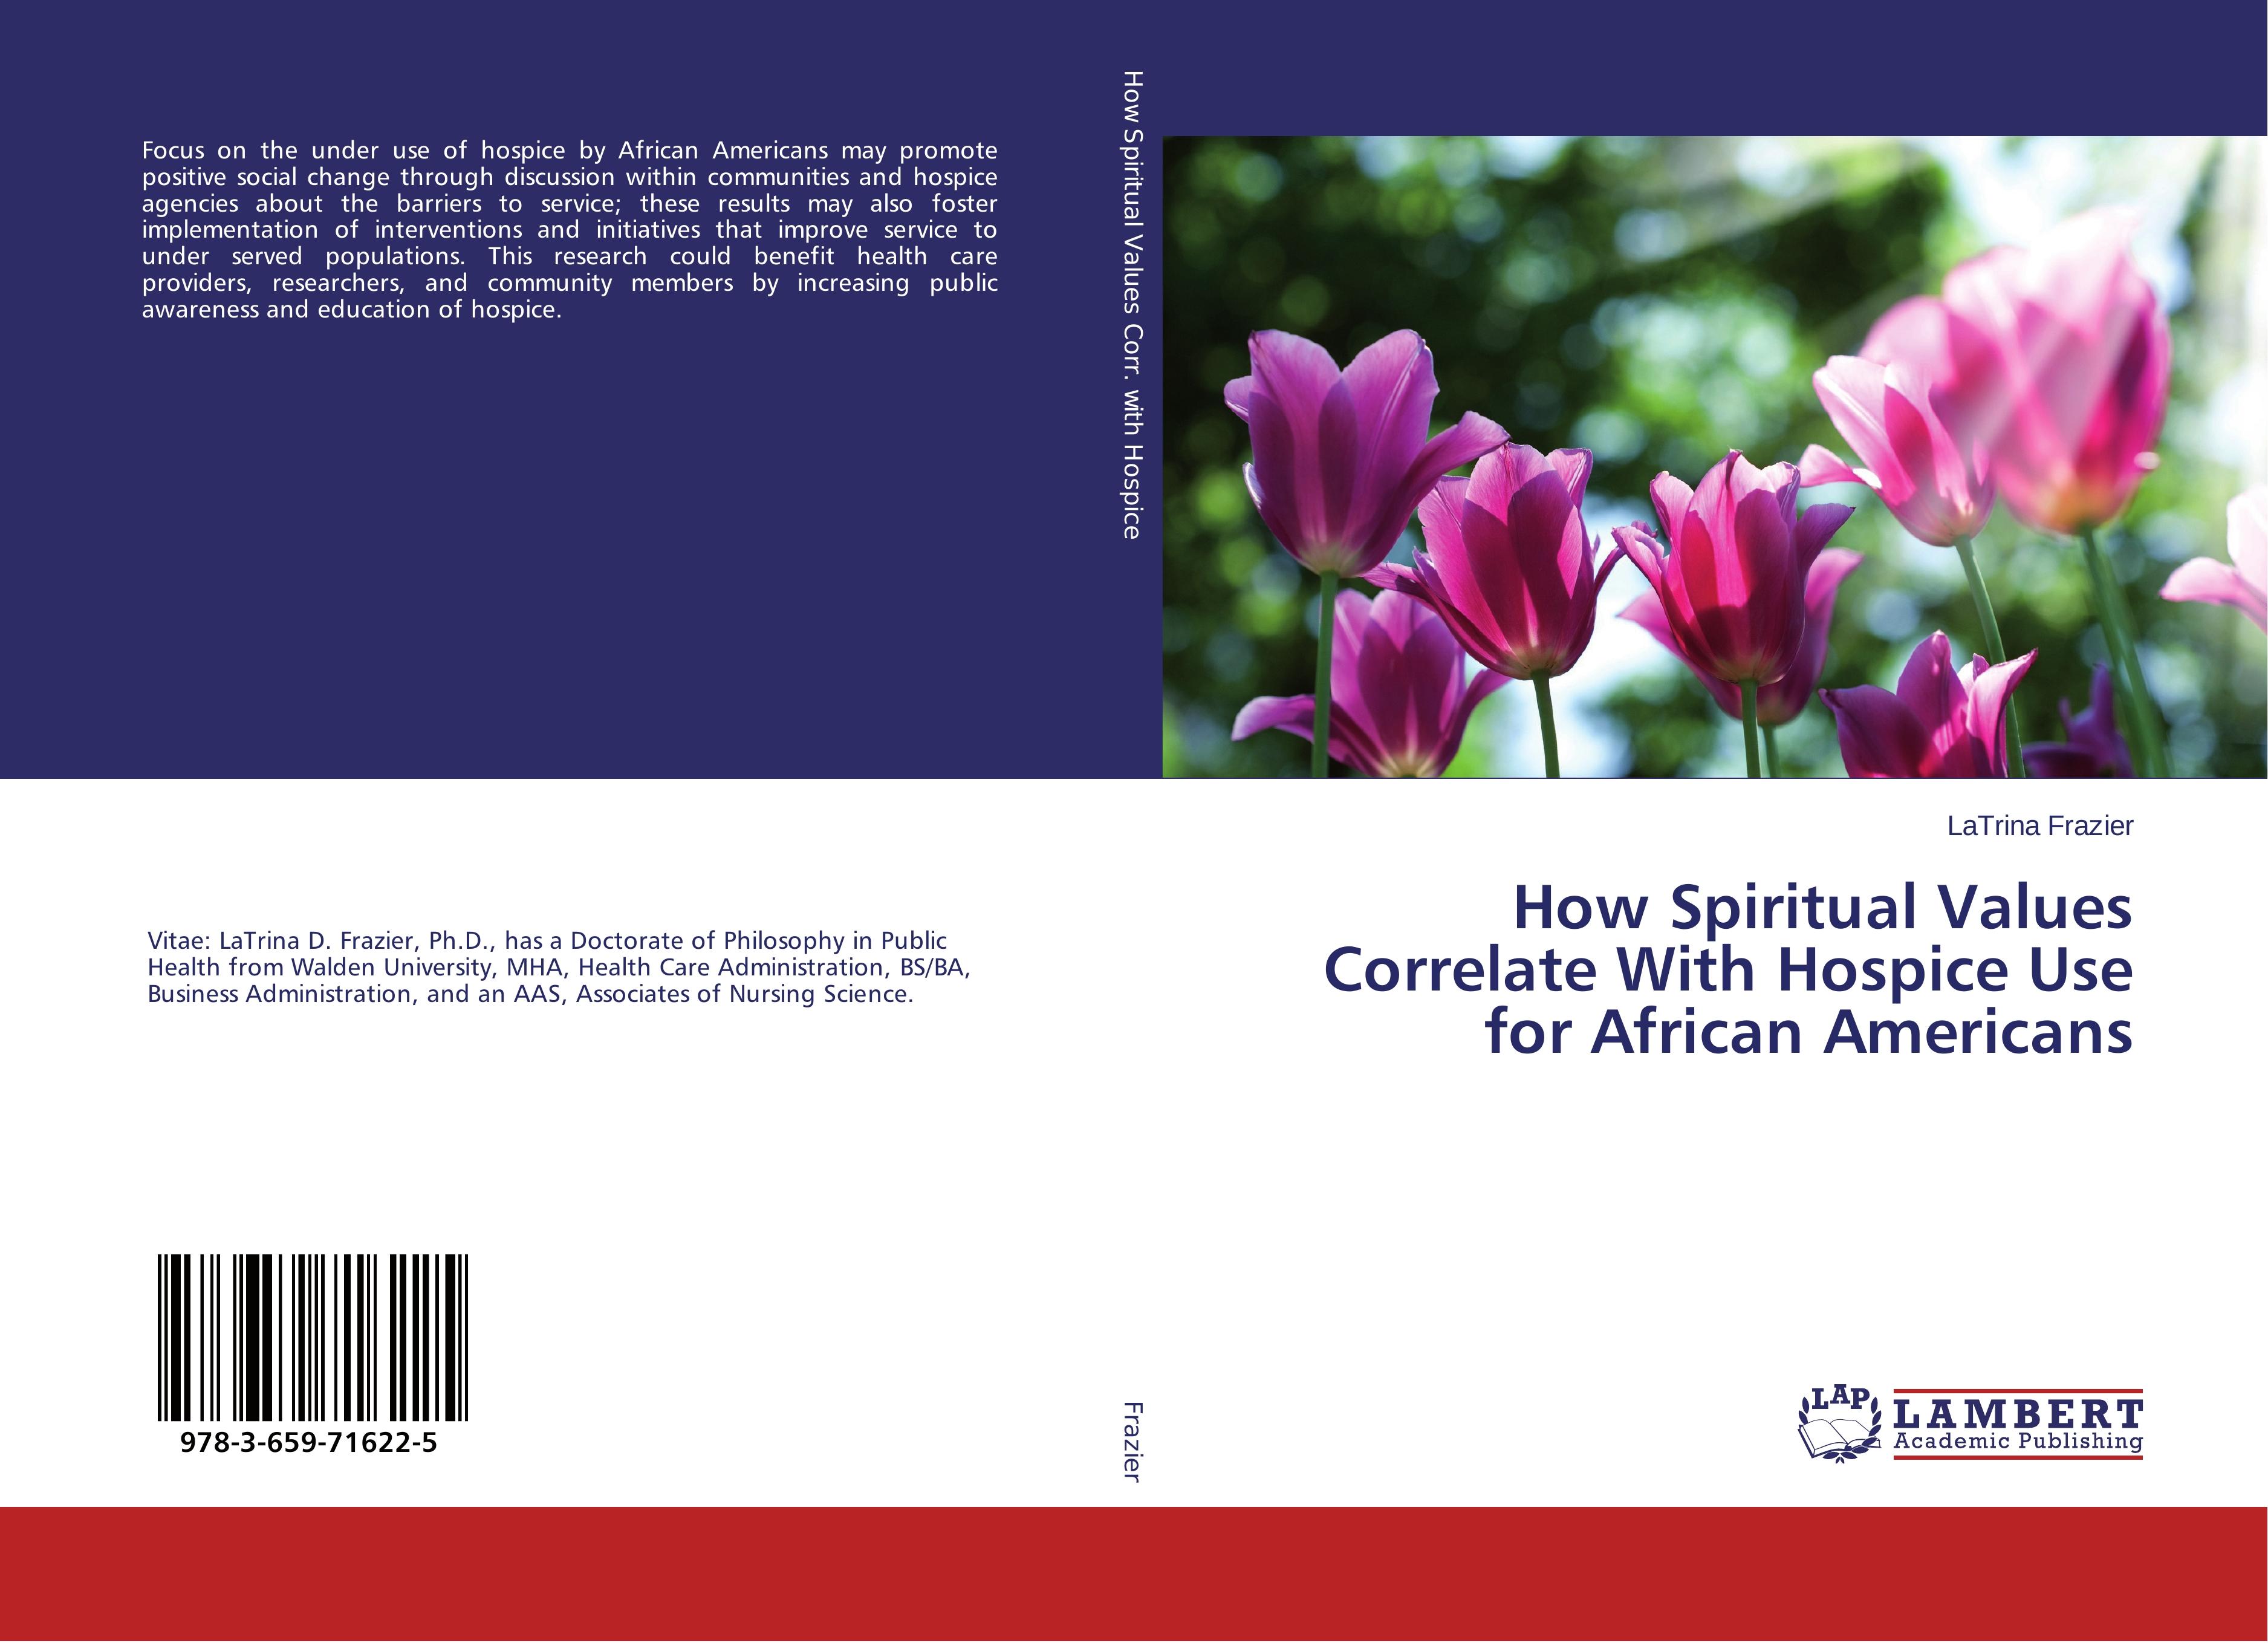 How Spiritual Values Correlate With Hospice Use for African Americans - Frazier, LaTrina